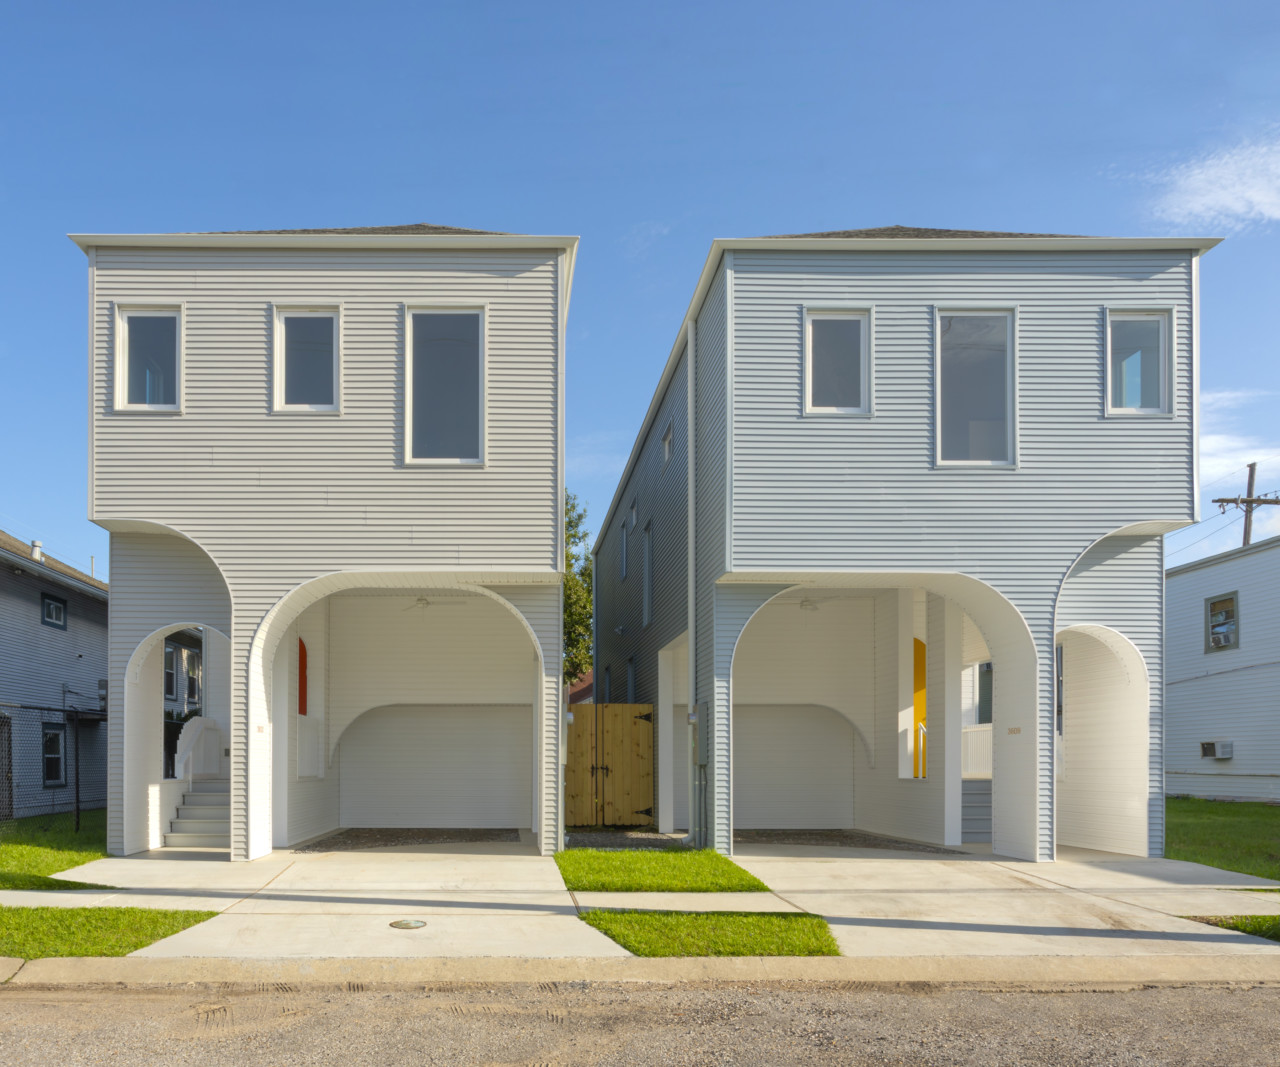 Two homes with colonnades out front, designed by office of jonathan tate